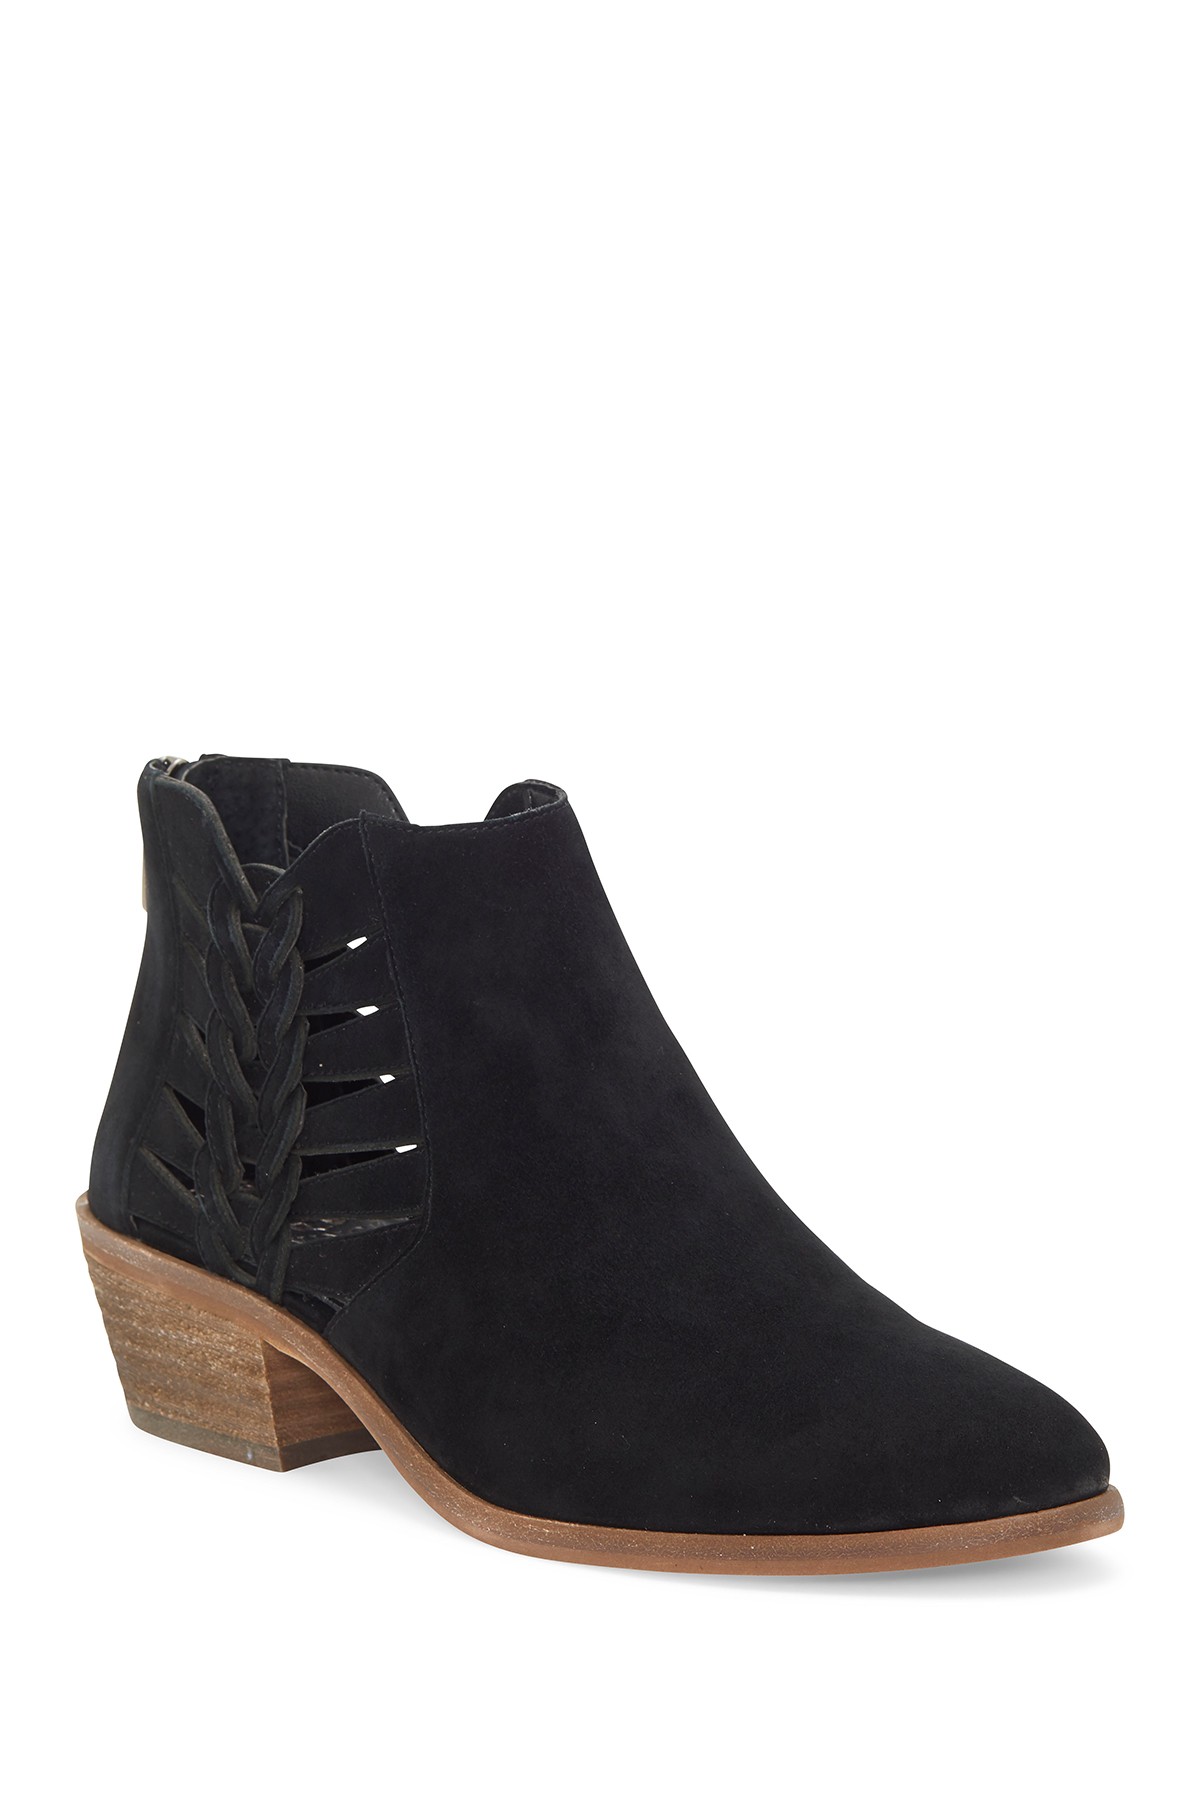 vince camuto black boots